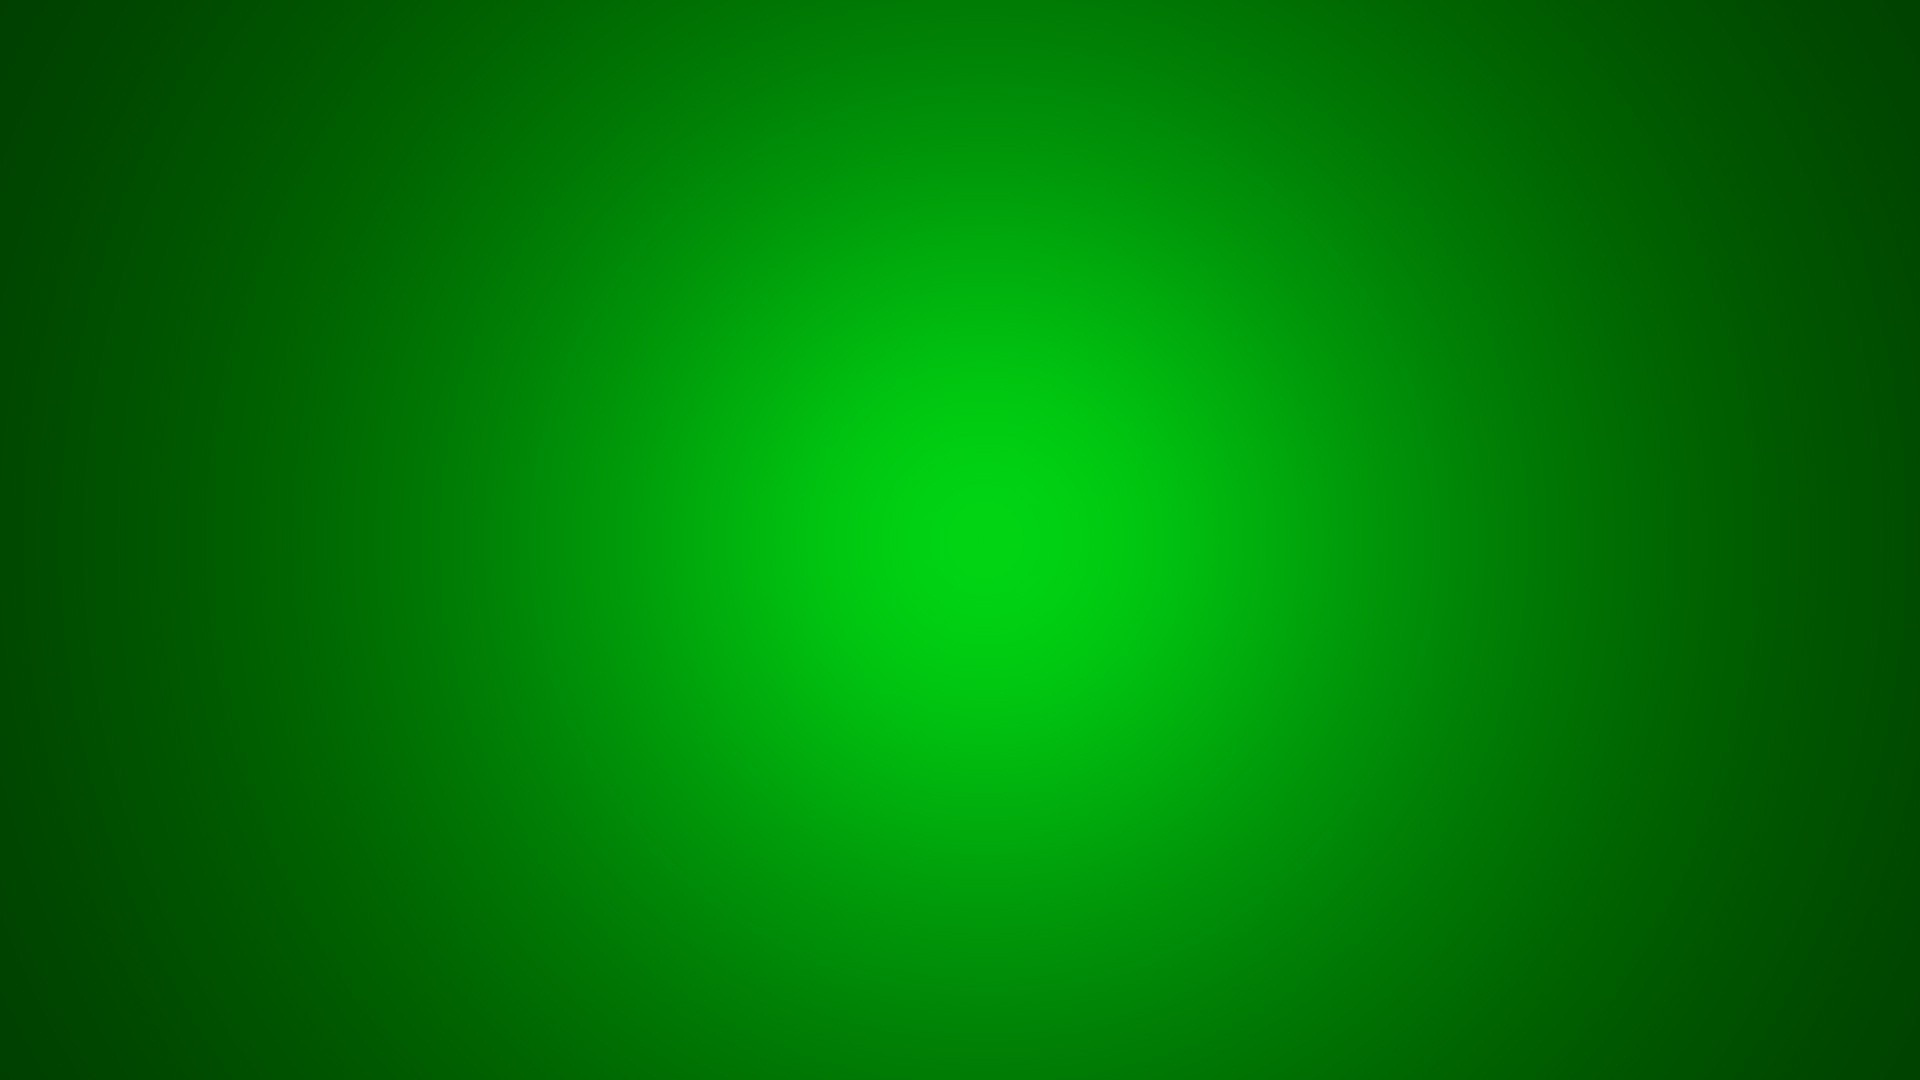 Middle shine green abstract plain wallpapers | HD Wallpapers Rocks